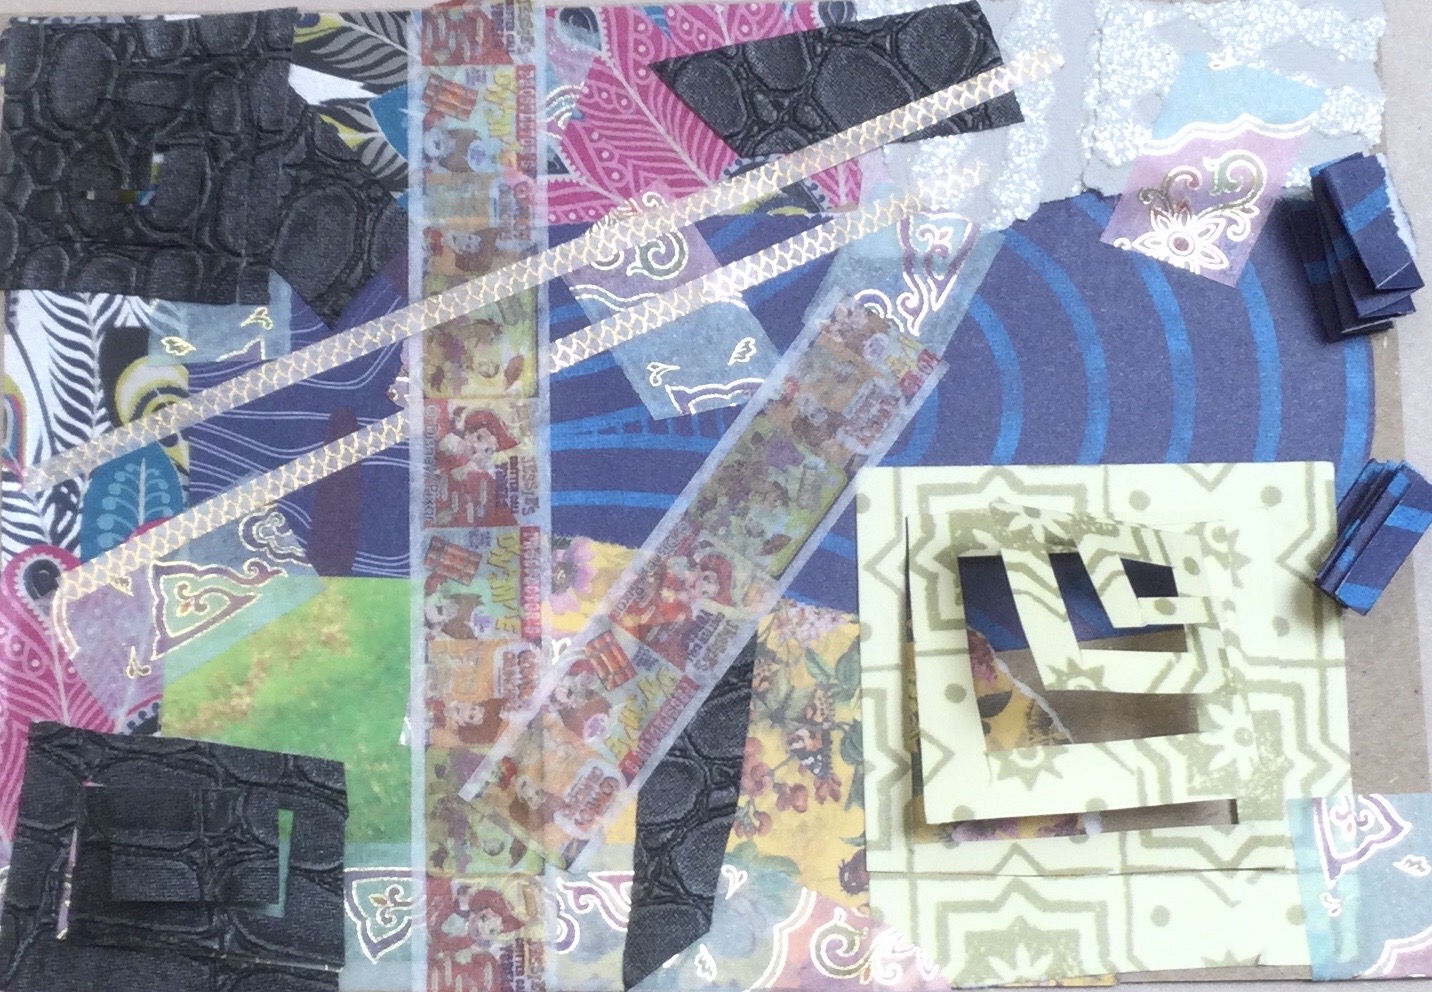 A collaged postcard covered in snippets of paper, overlaid with thin white and gold tape, thicker cartoon tape and cut-out patterns in which the paper rises up from the surface of the card